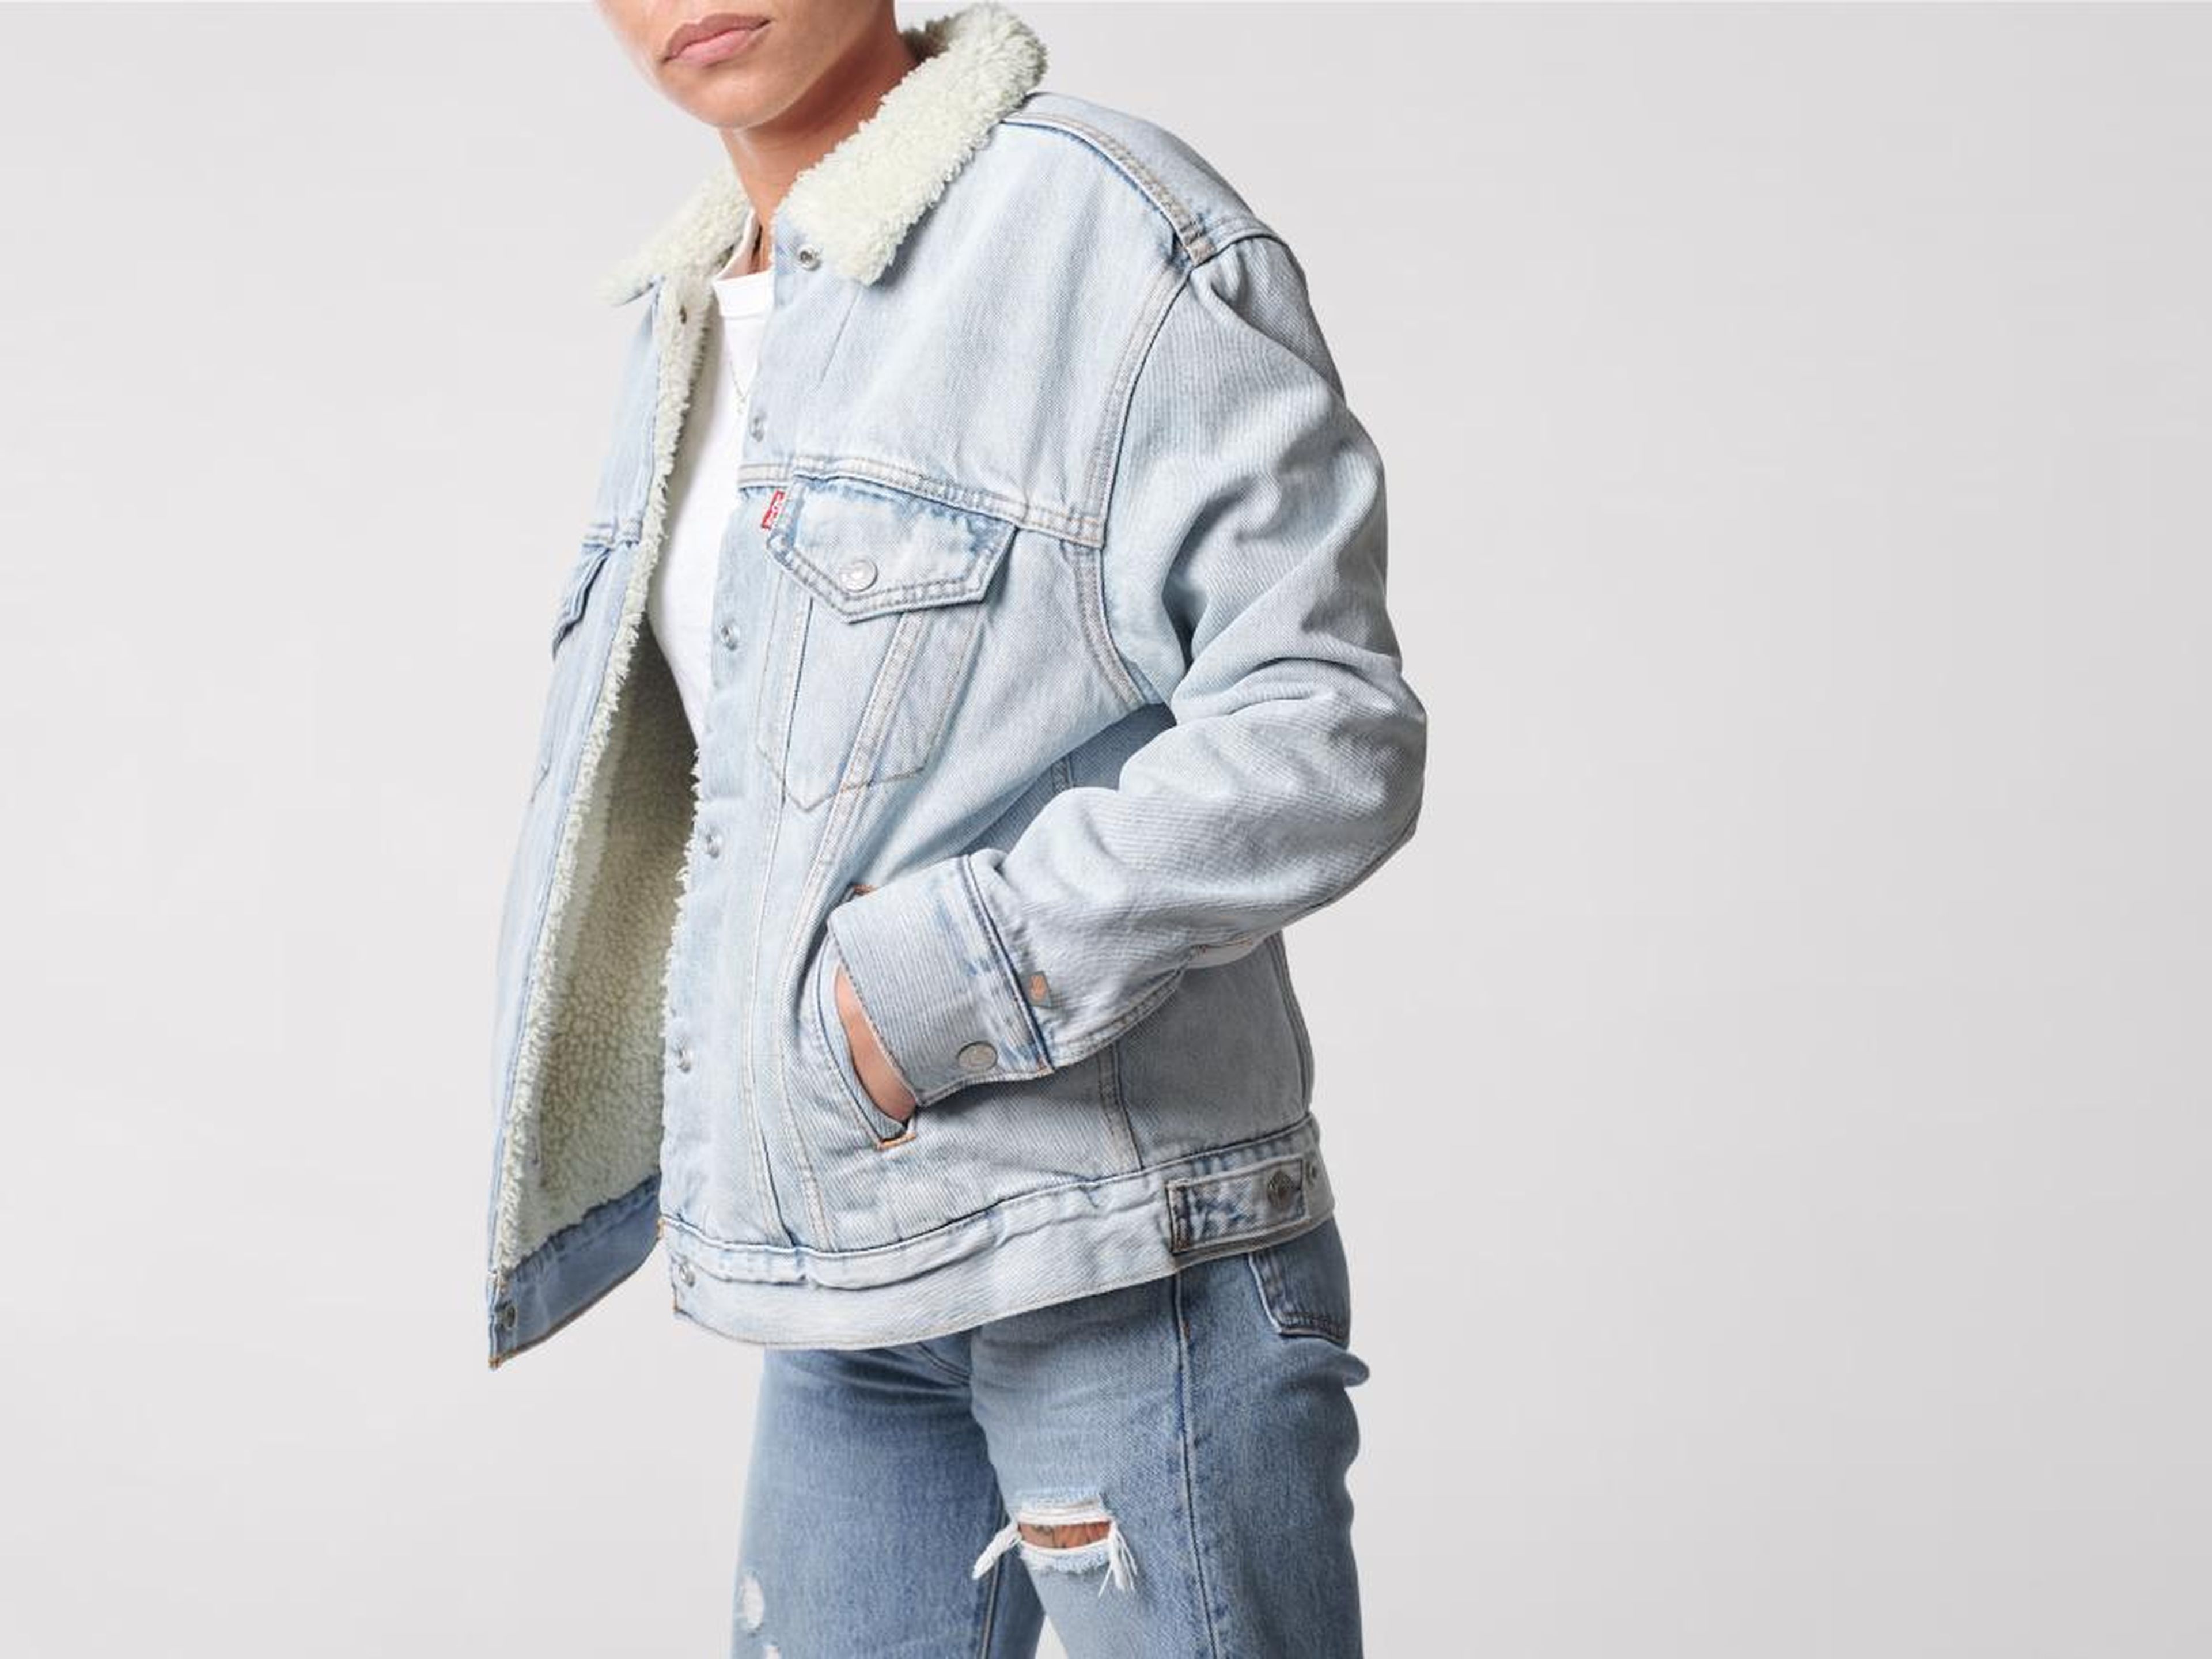 While this is the second iteration of the jacket, it already appears much improved from the first version. The fits and styles of the jacket itself are better and trendier, it's cheaper overall, and most importantly, it looks less